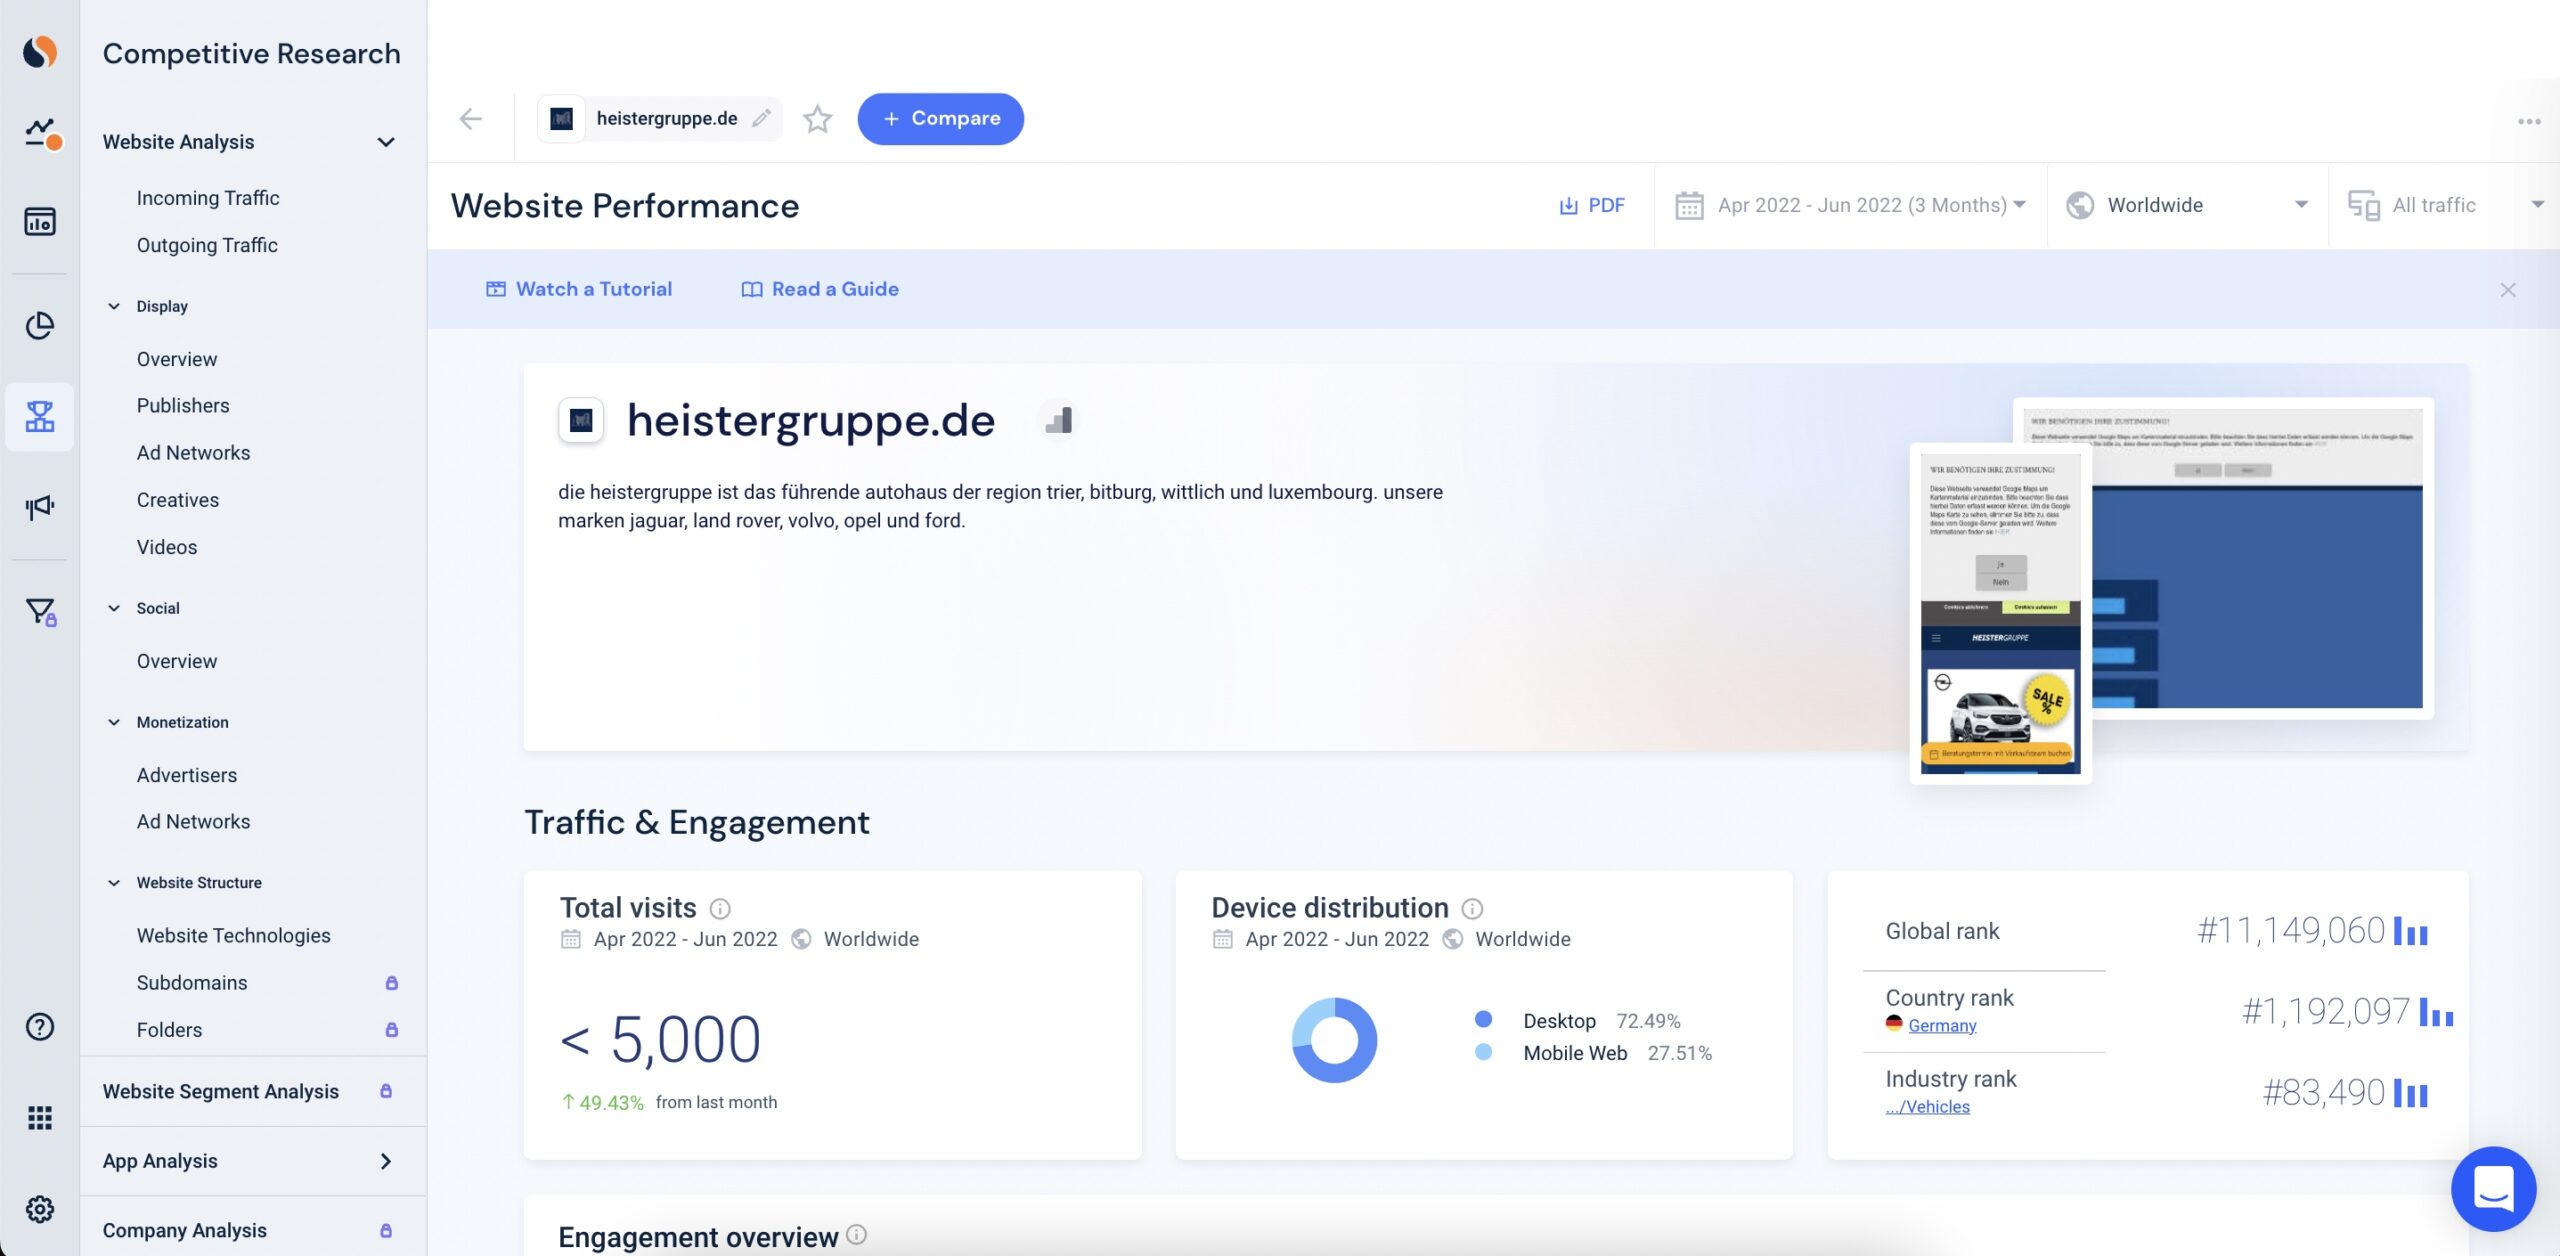 Das Tool zur Wettbewerbsanalyse "Competitive Research" in Similarweb